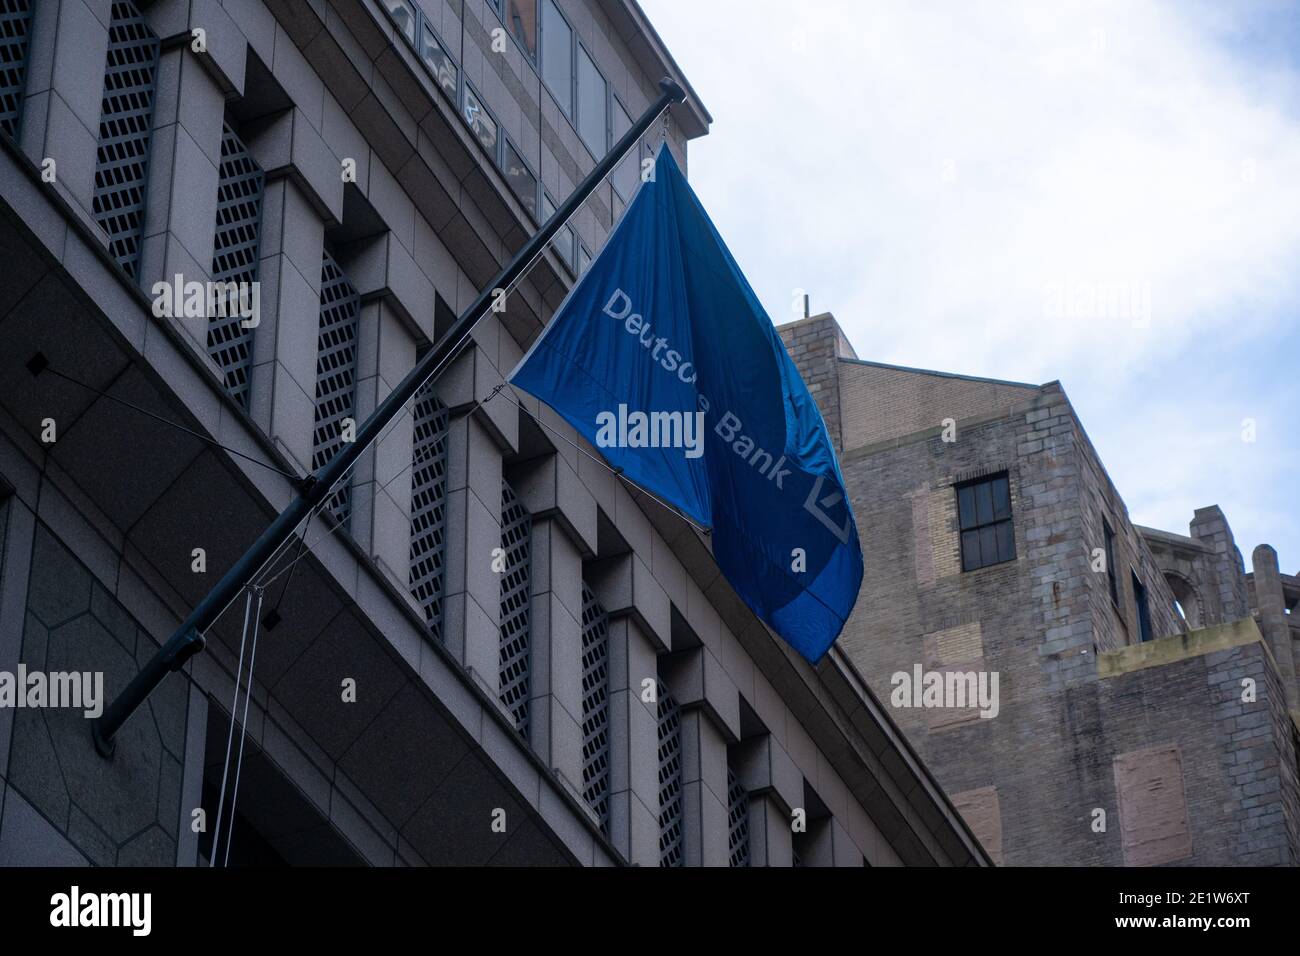 NEW YORK, NY – JANUARY 09: Deutsche Bank flag hangs from Deutsche Bank AG New York Headquarters on Wall Street on January 9, 2021 in New York City. Deutsche Bank AG has agreed to pay more than $130 million to settle criminal and civil charges resulting the Federal government's investigation into bribery of foreign officials and manipulated the market for precious-metals futures through a trading tactic known as spoofing.  Deutsche Bank AG is still under investigation by New York State for its dealing with Trump Organization. Stock Photo